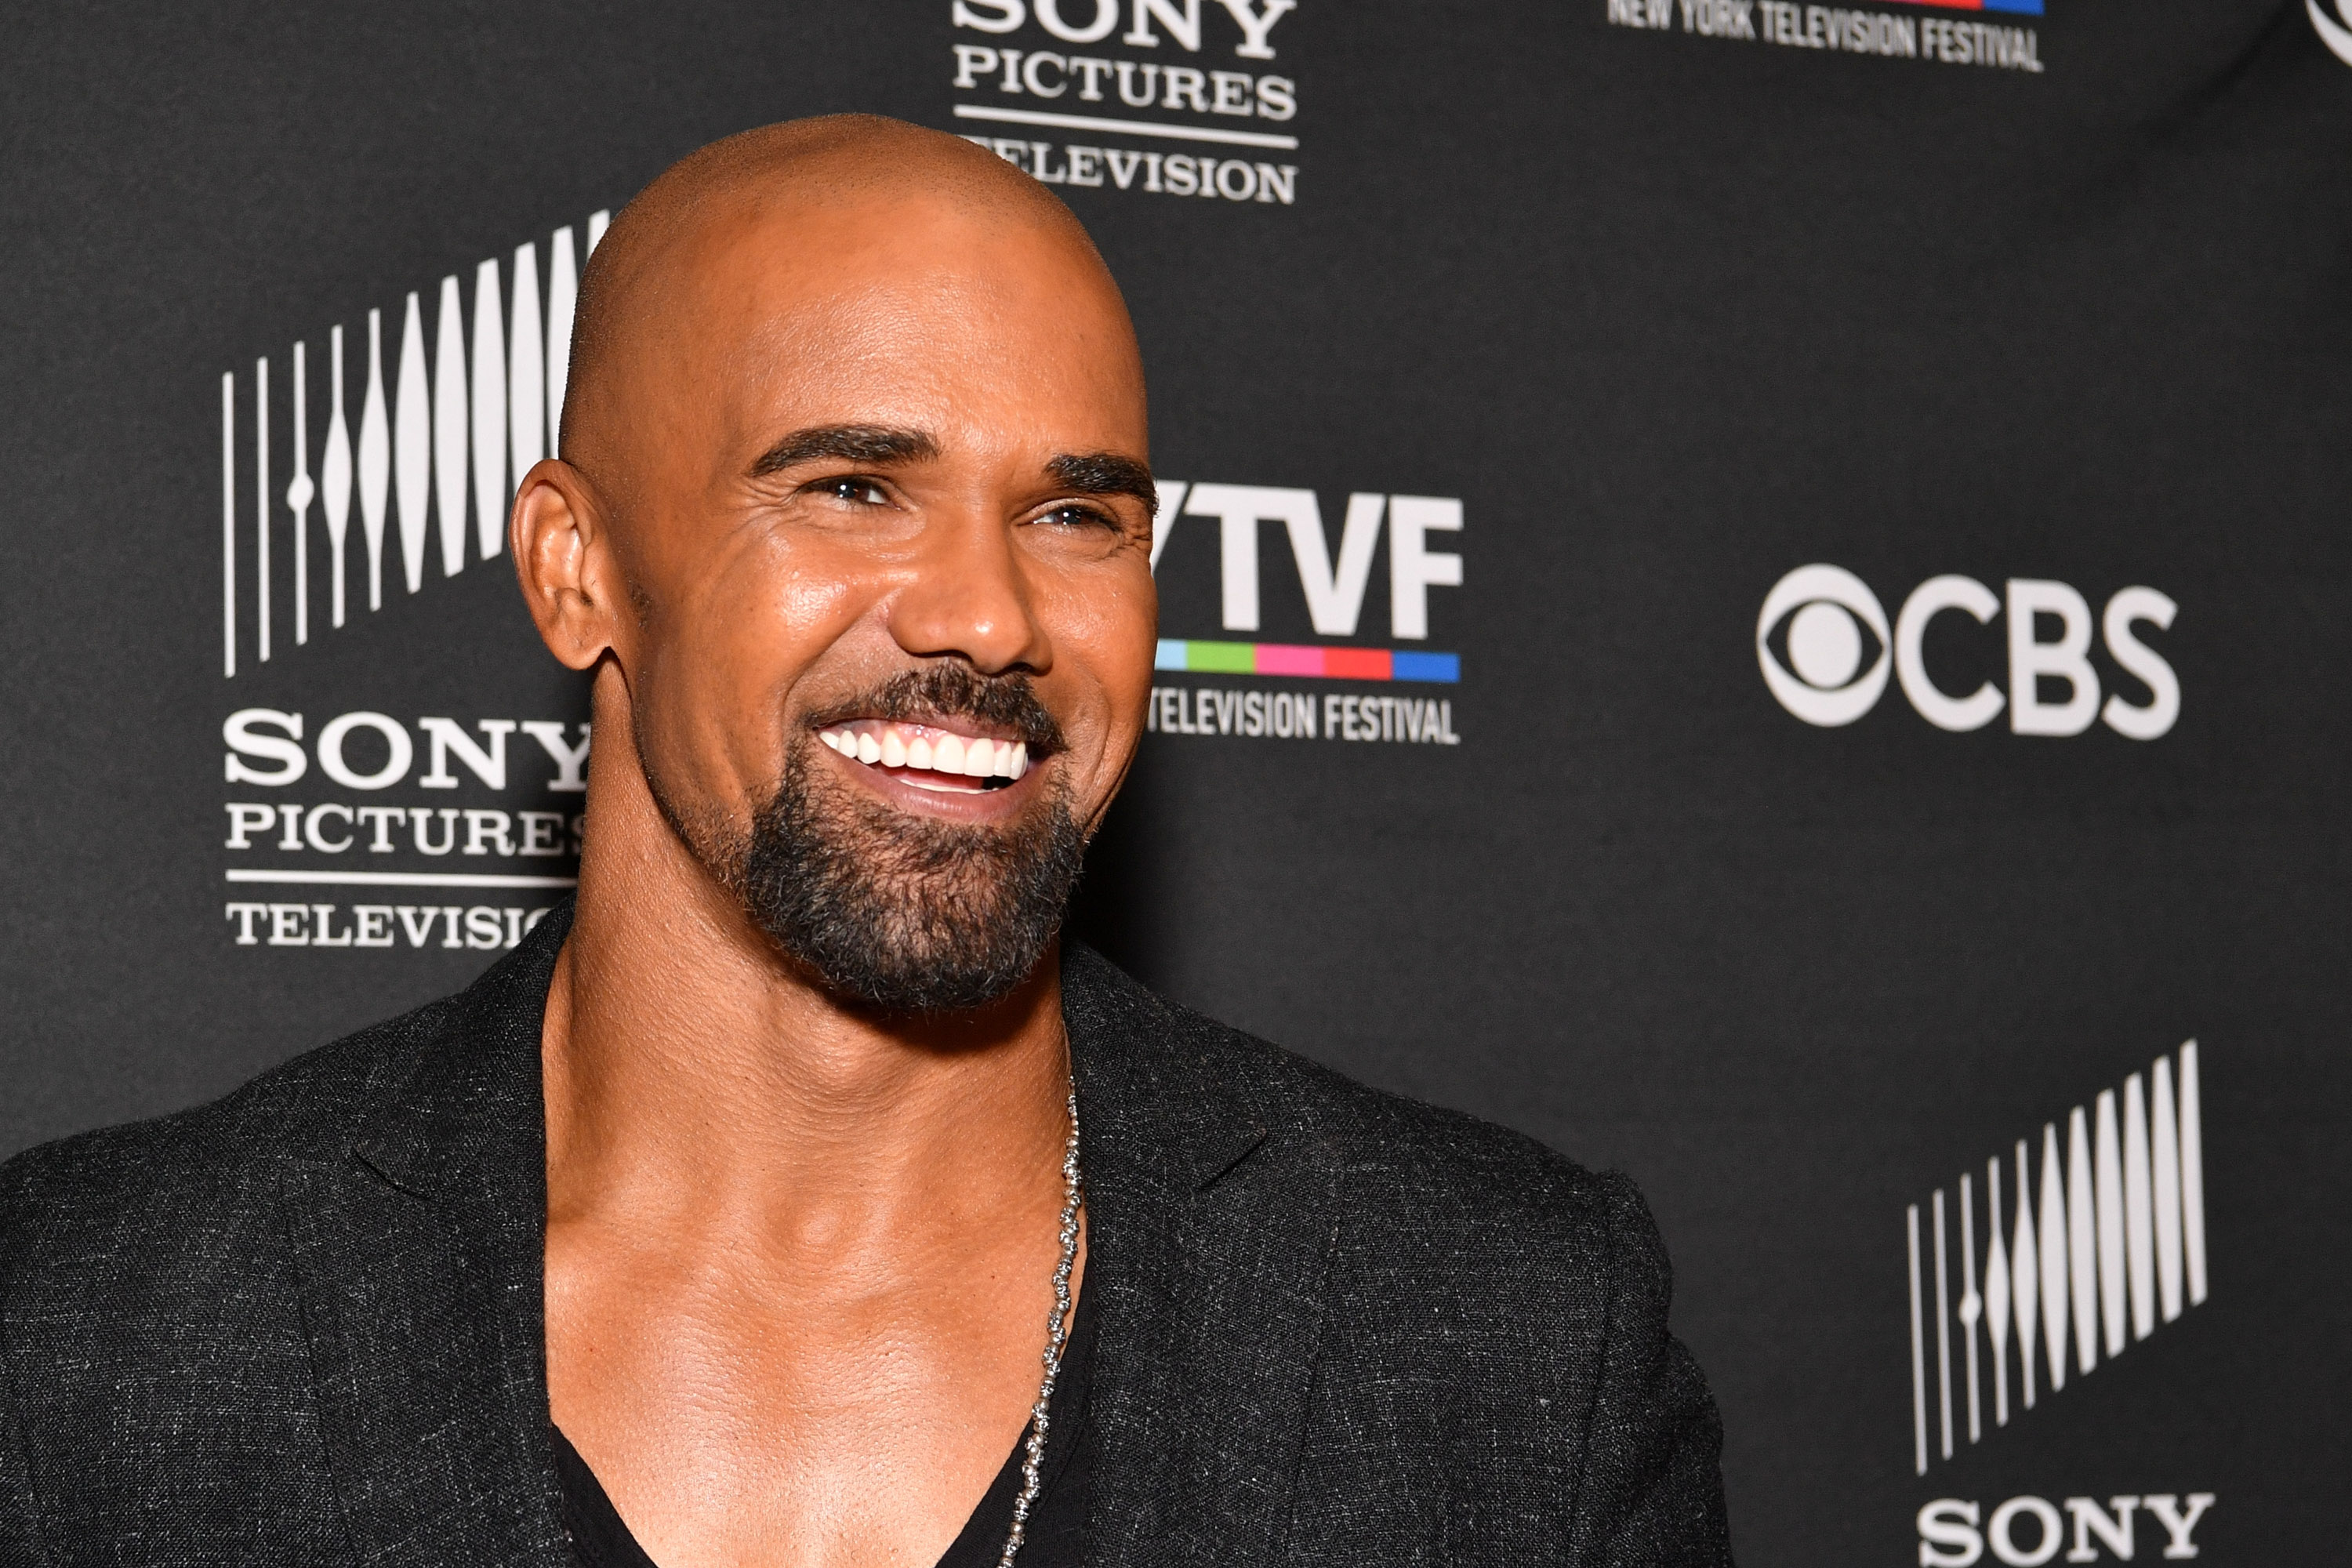 Whos dating who shemar moore